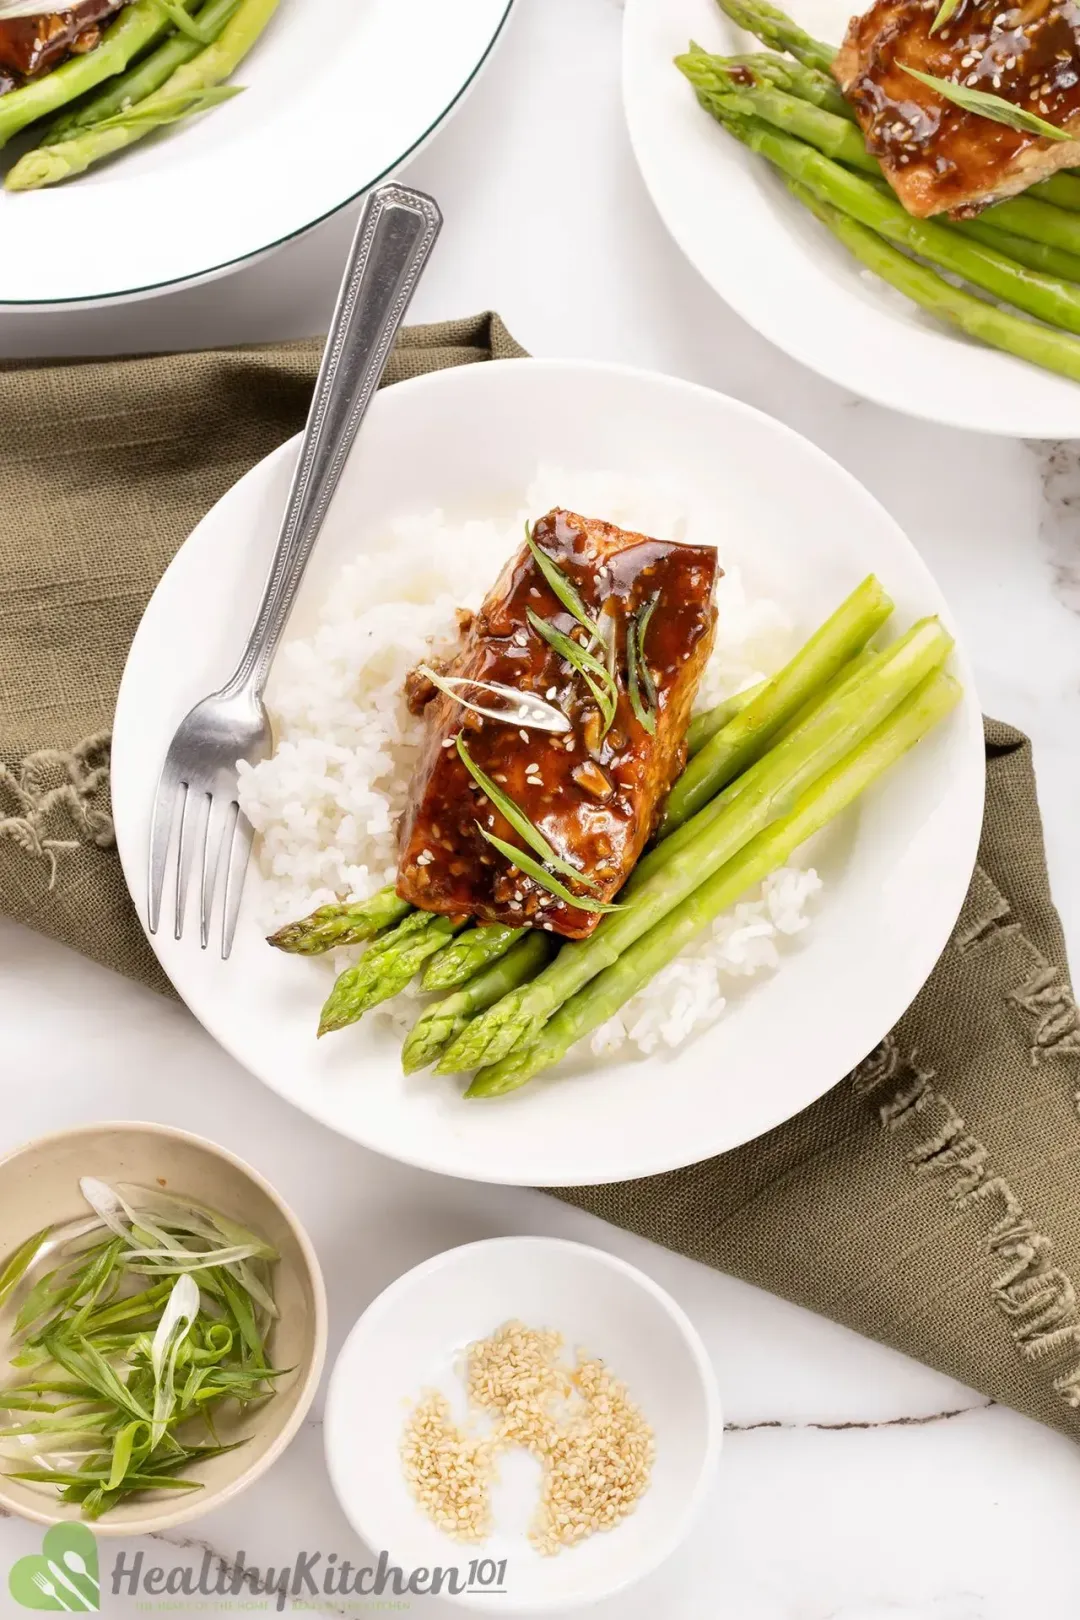 A serving plate of one baked teriyaki salmon filet served on cooked white rice and asparagus; on the side are two small bowls of roasted sesame seeds and chopped scallion.